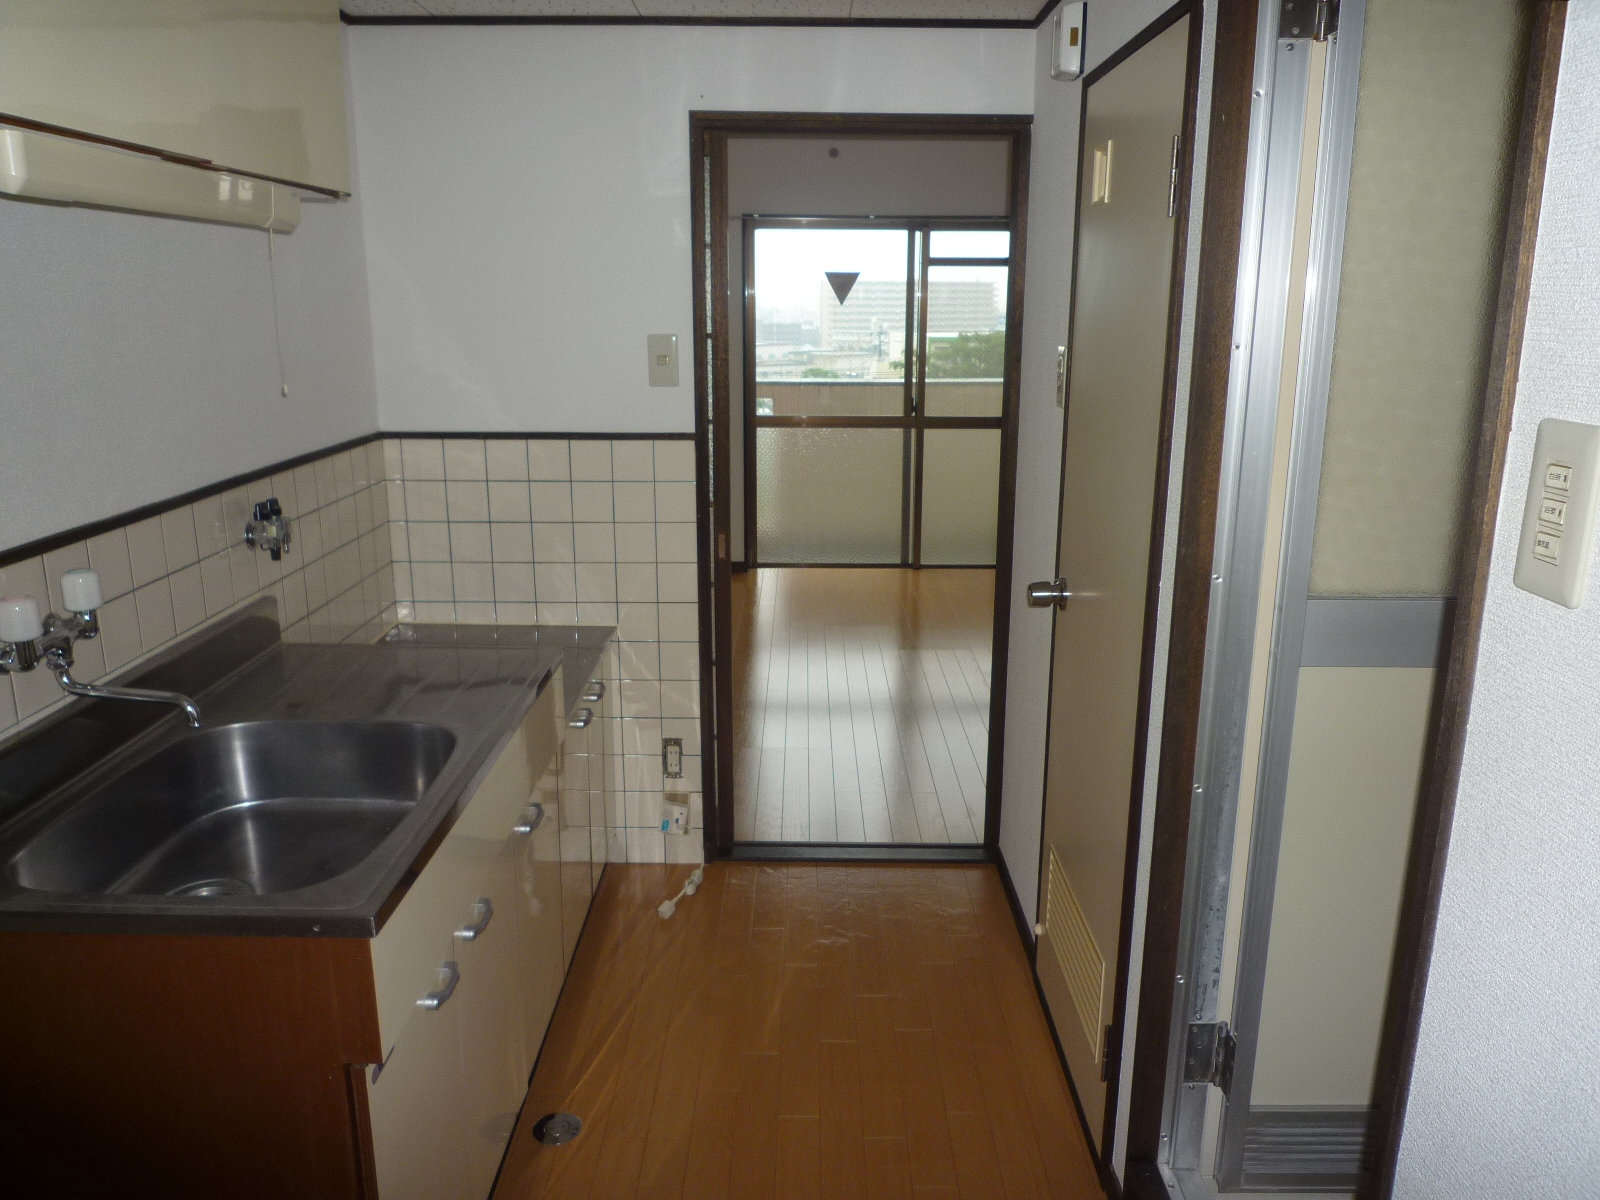 Entrance. There is also a feeling of cleanliness entrance of the kitchen next to